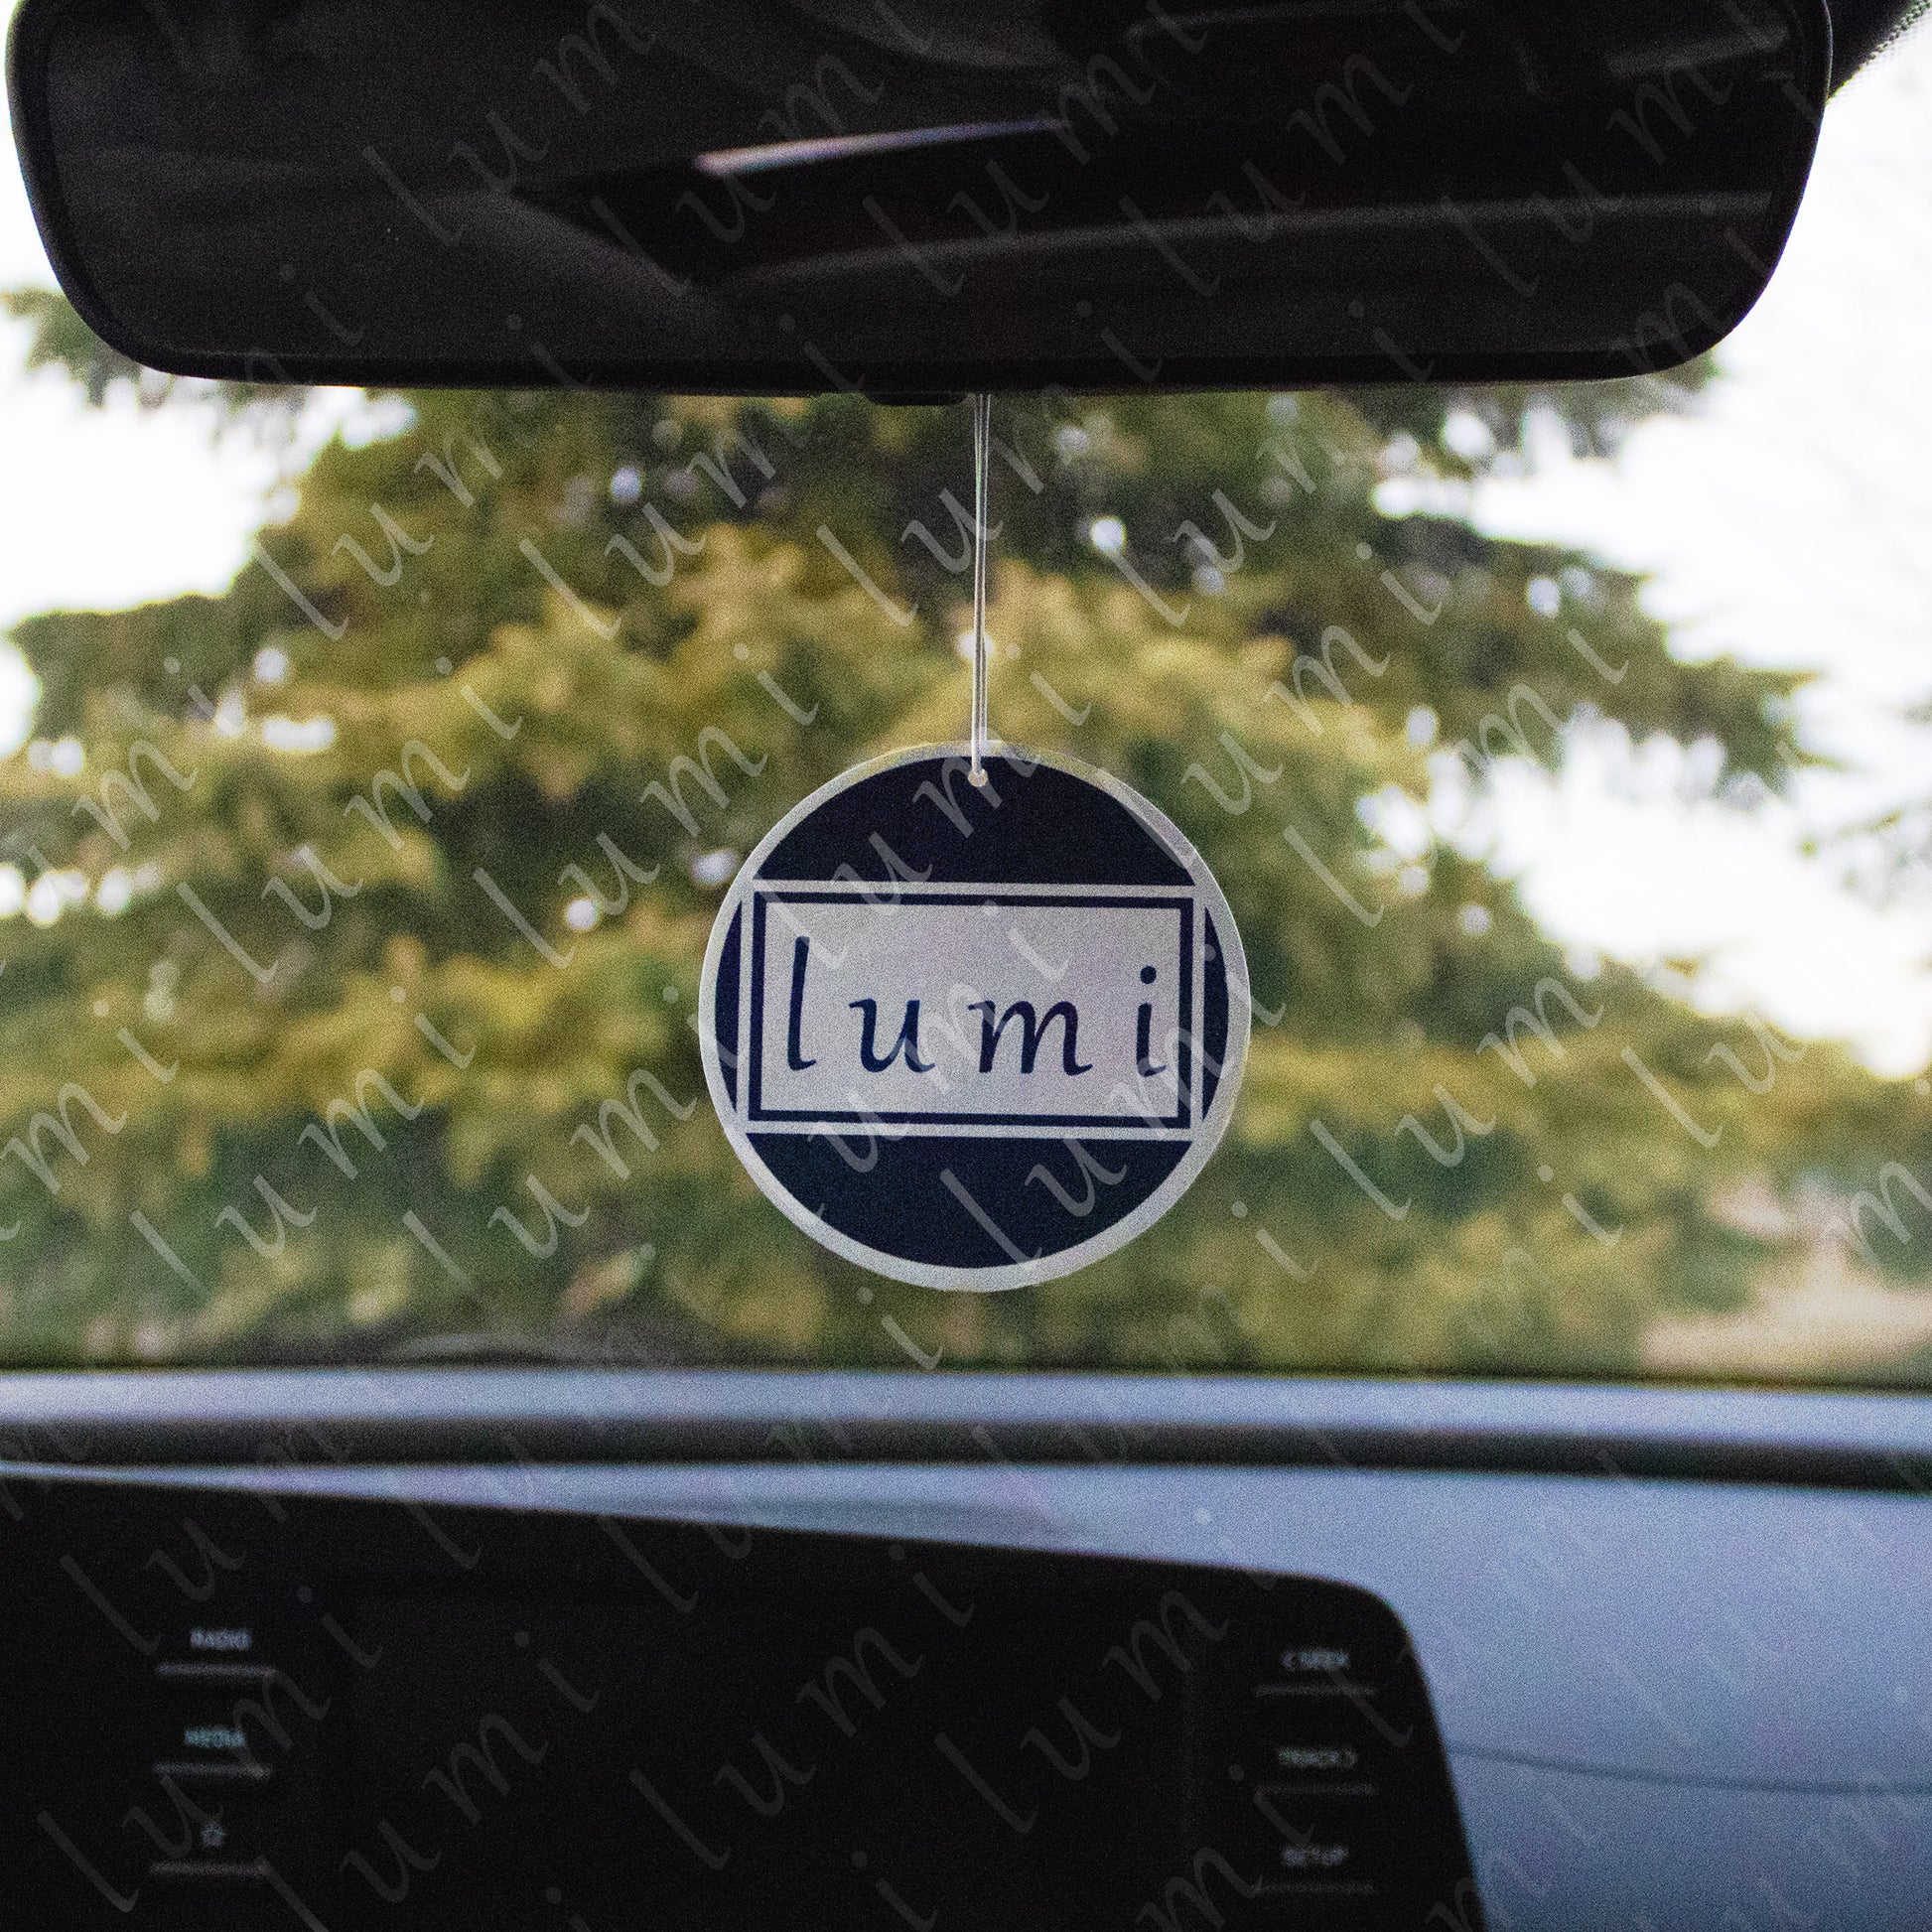 An image of a  air freshener with the LUMi Store logo prominently displayed on it. The logo consists of the letters 'LUMi' in a modern font The air freshener has a circular shape and a white string for hanging.